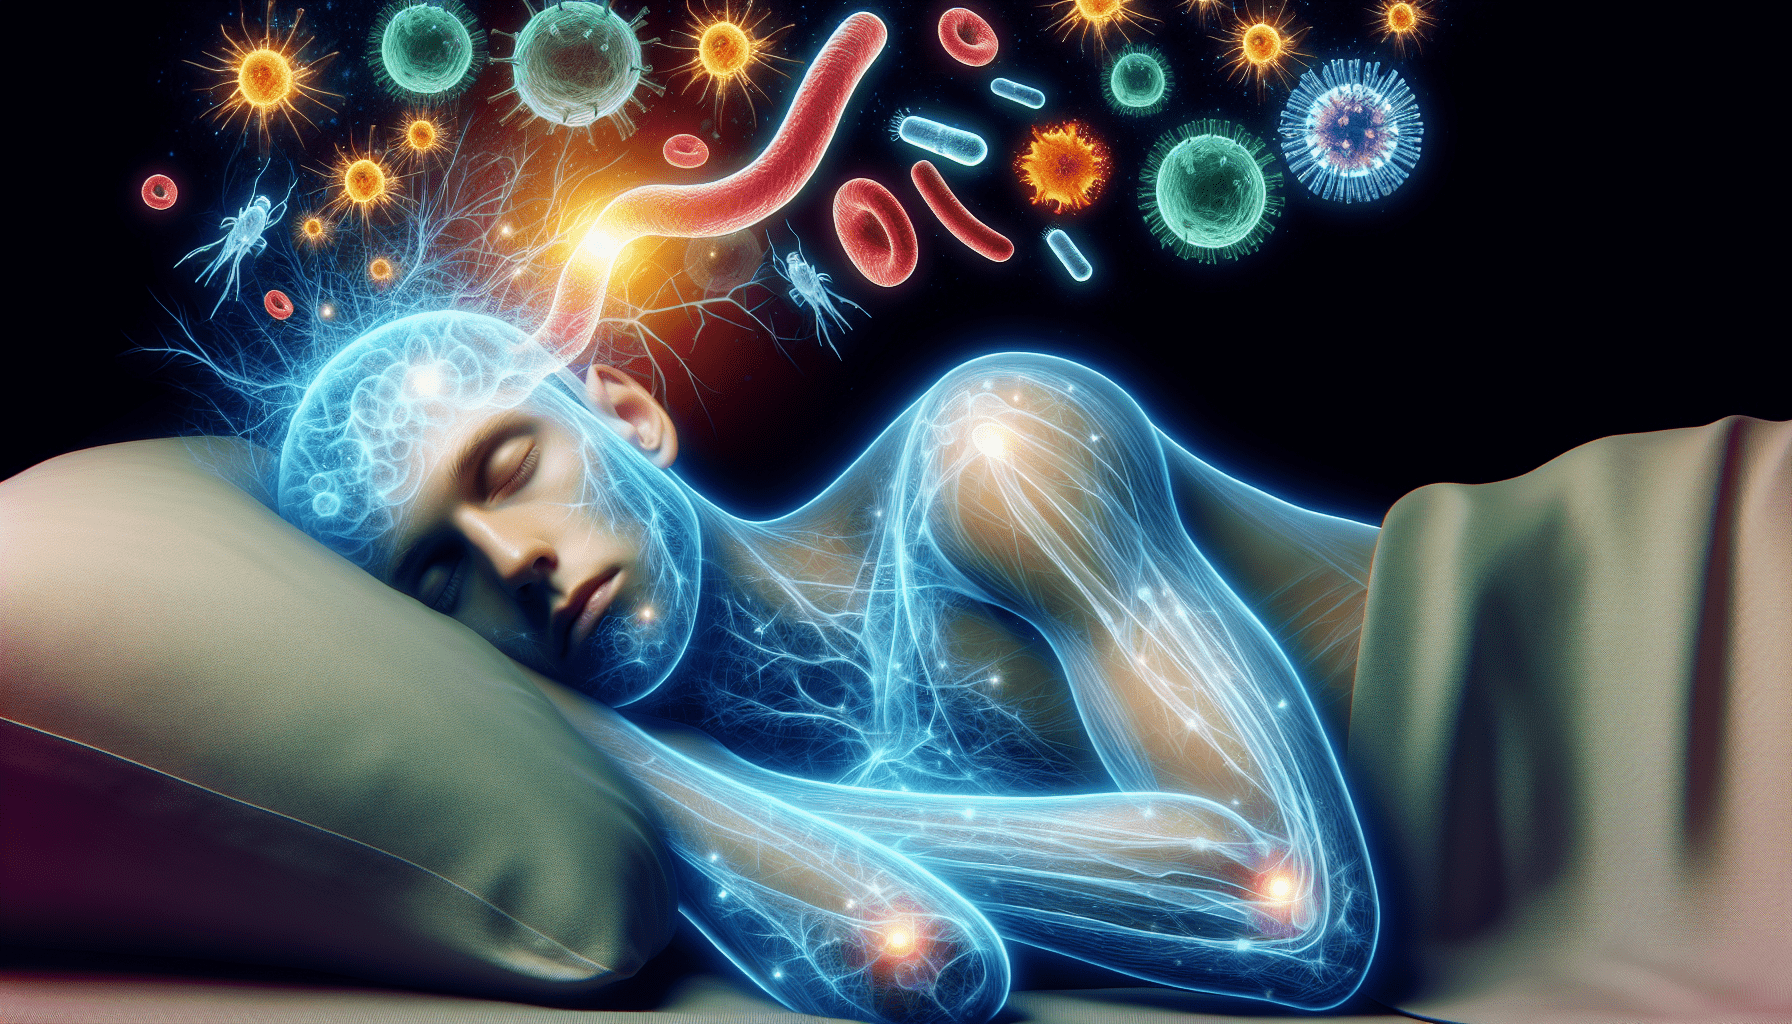 Sleep Apnea And Its Effects On The Immune System